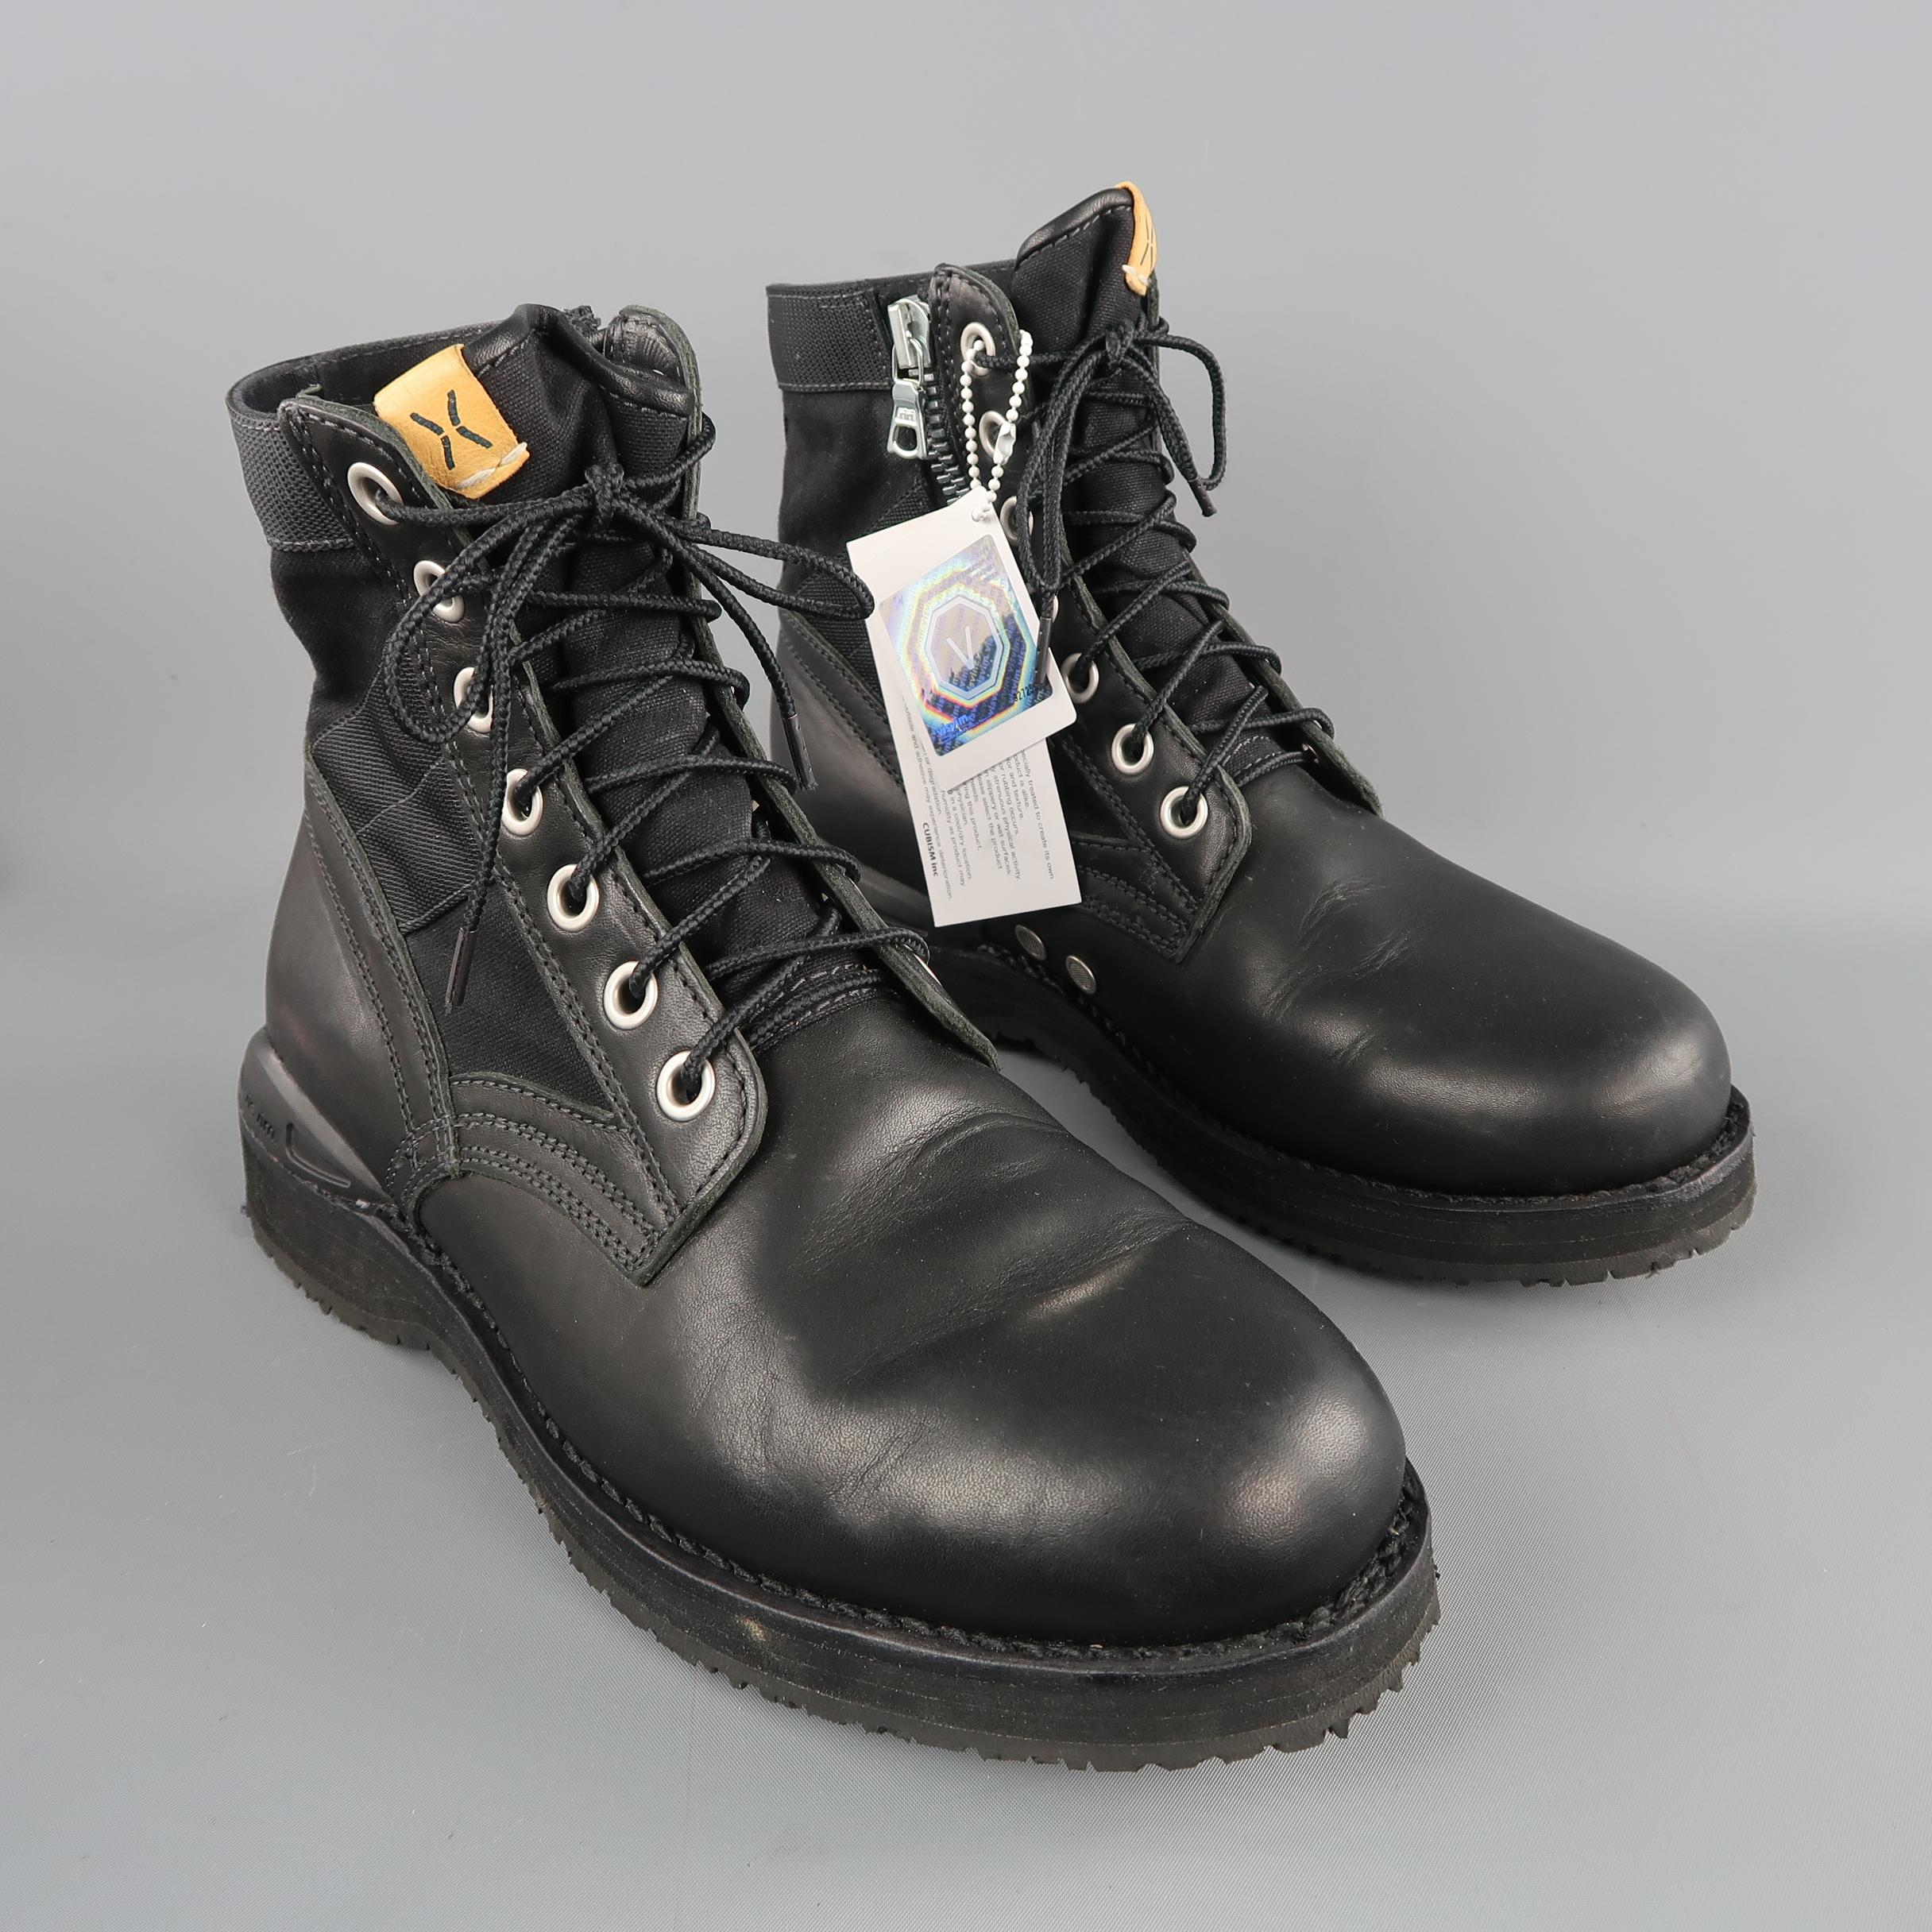 VISVIM ankle boots are in black solid leather, lace up, with zipper and trim details. With box.  Retails: $1200
 
New with tags.
Marked: 9
 
Measurements:
Outsole: 12  x 3  in.
